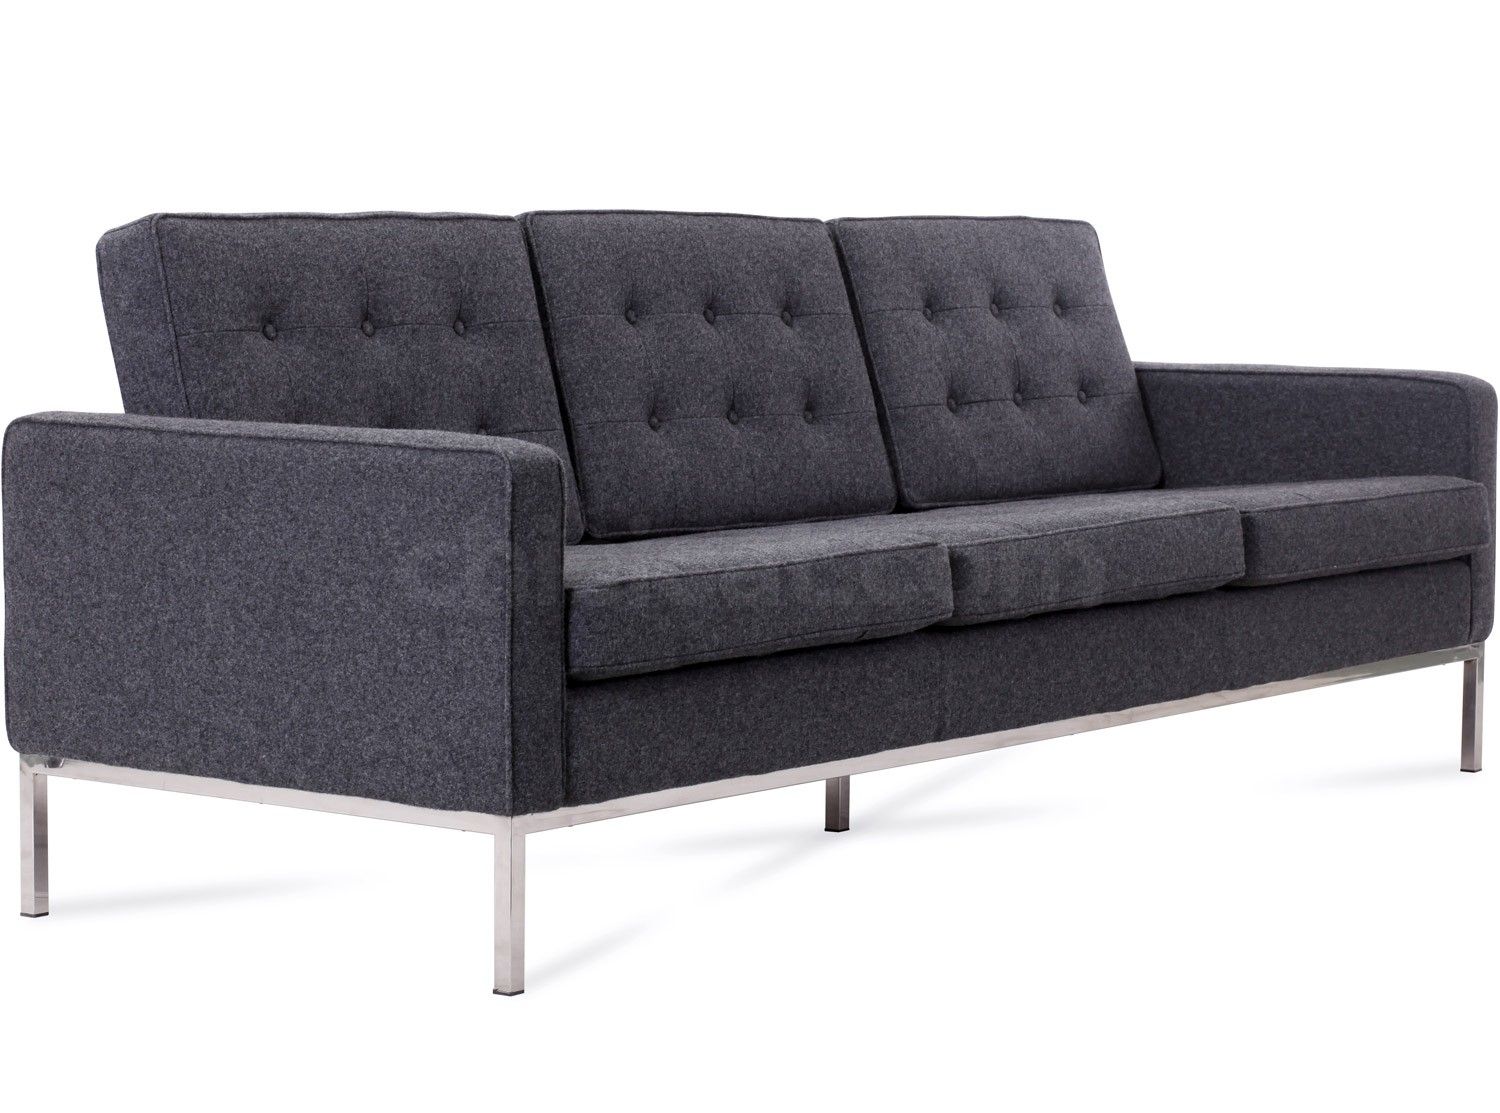 Florence Knoll Sofa 3 Seater Wool Platinum Replica With Regard To Florence Knoll 3 Seater Sofas (View 12 of 15)